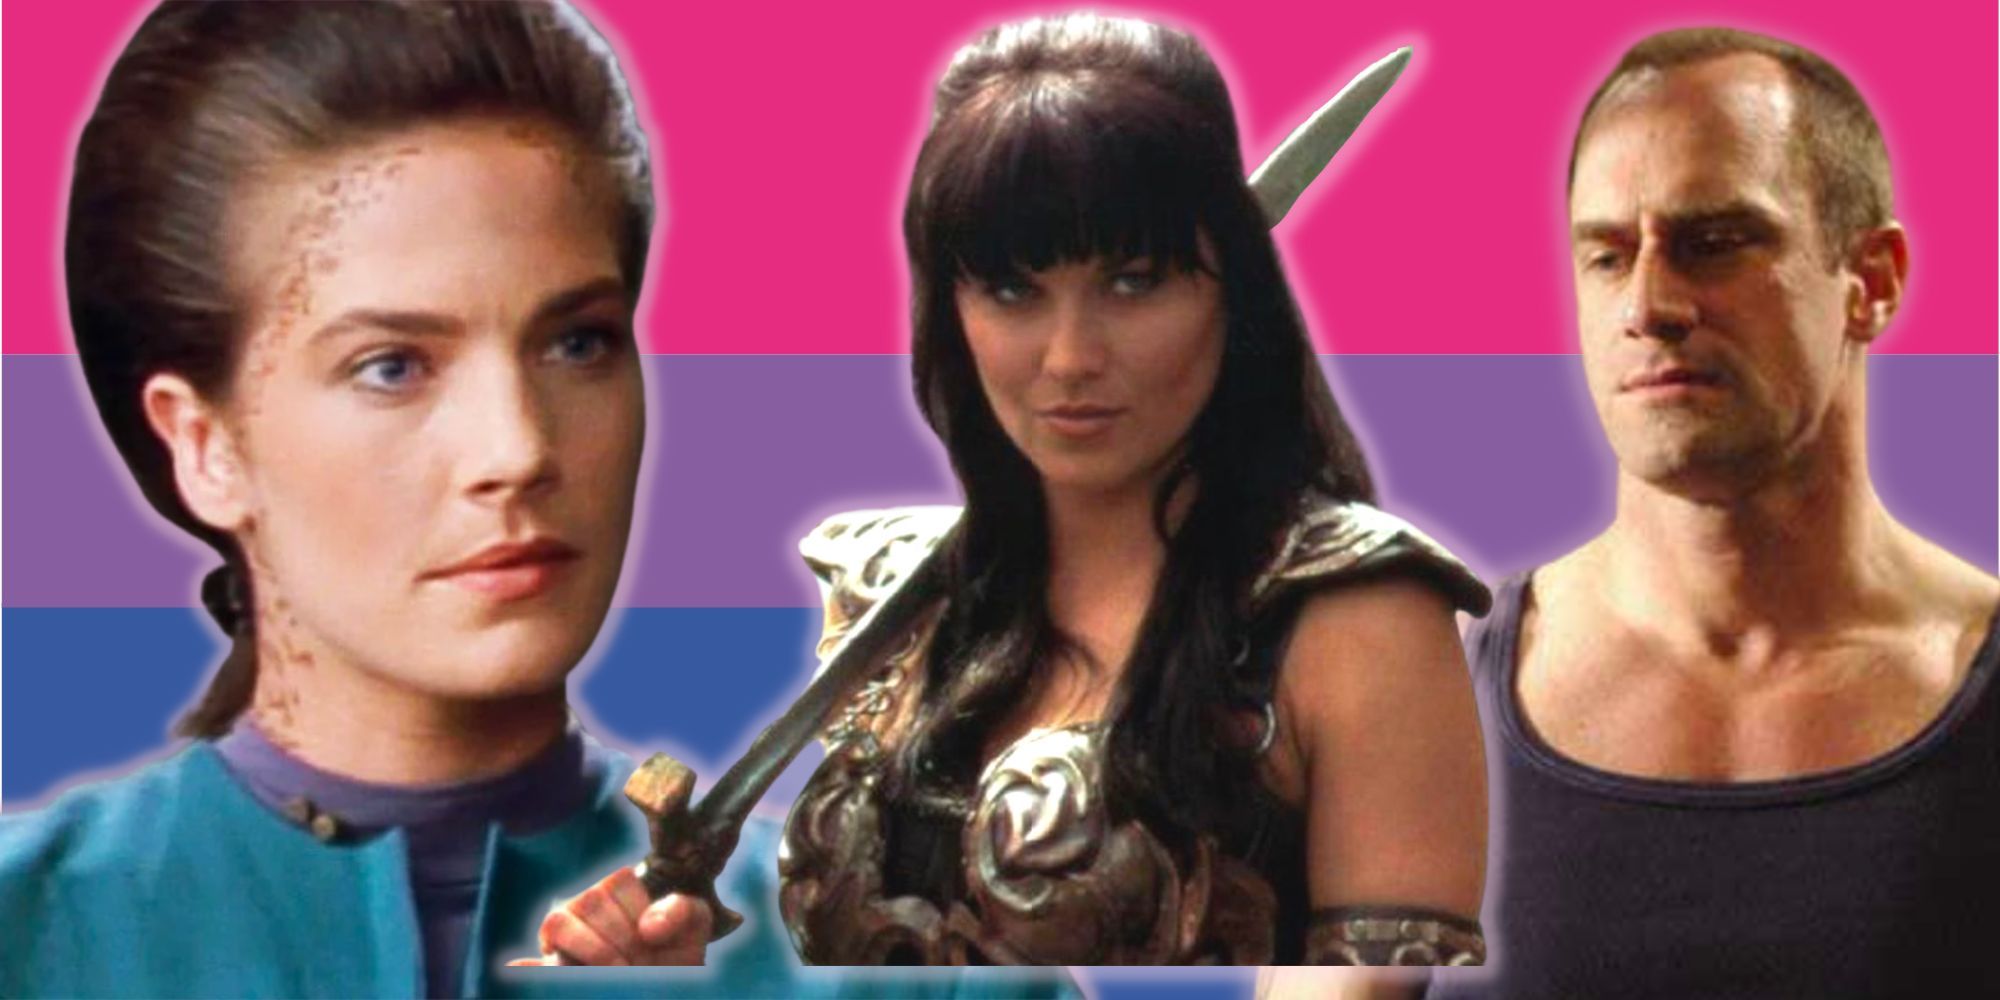 Bisexual characters that paved the way for representation